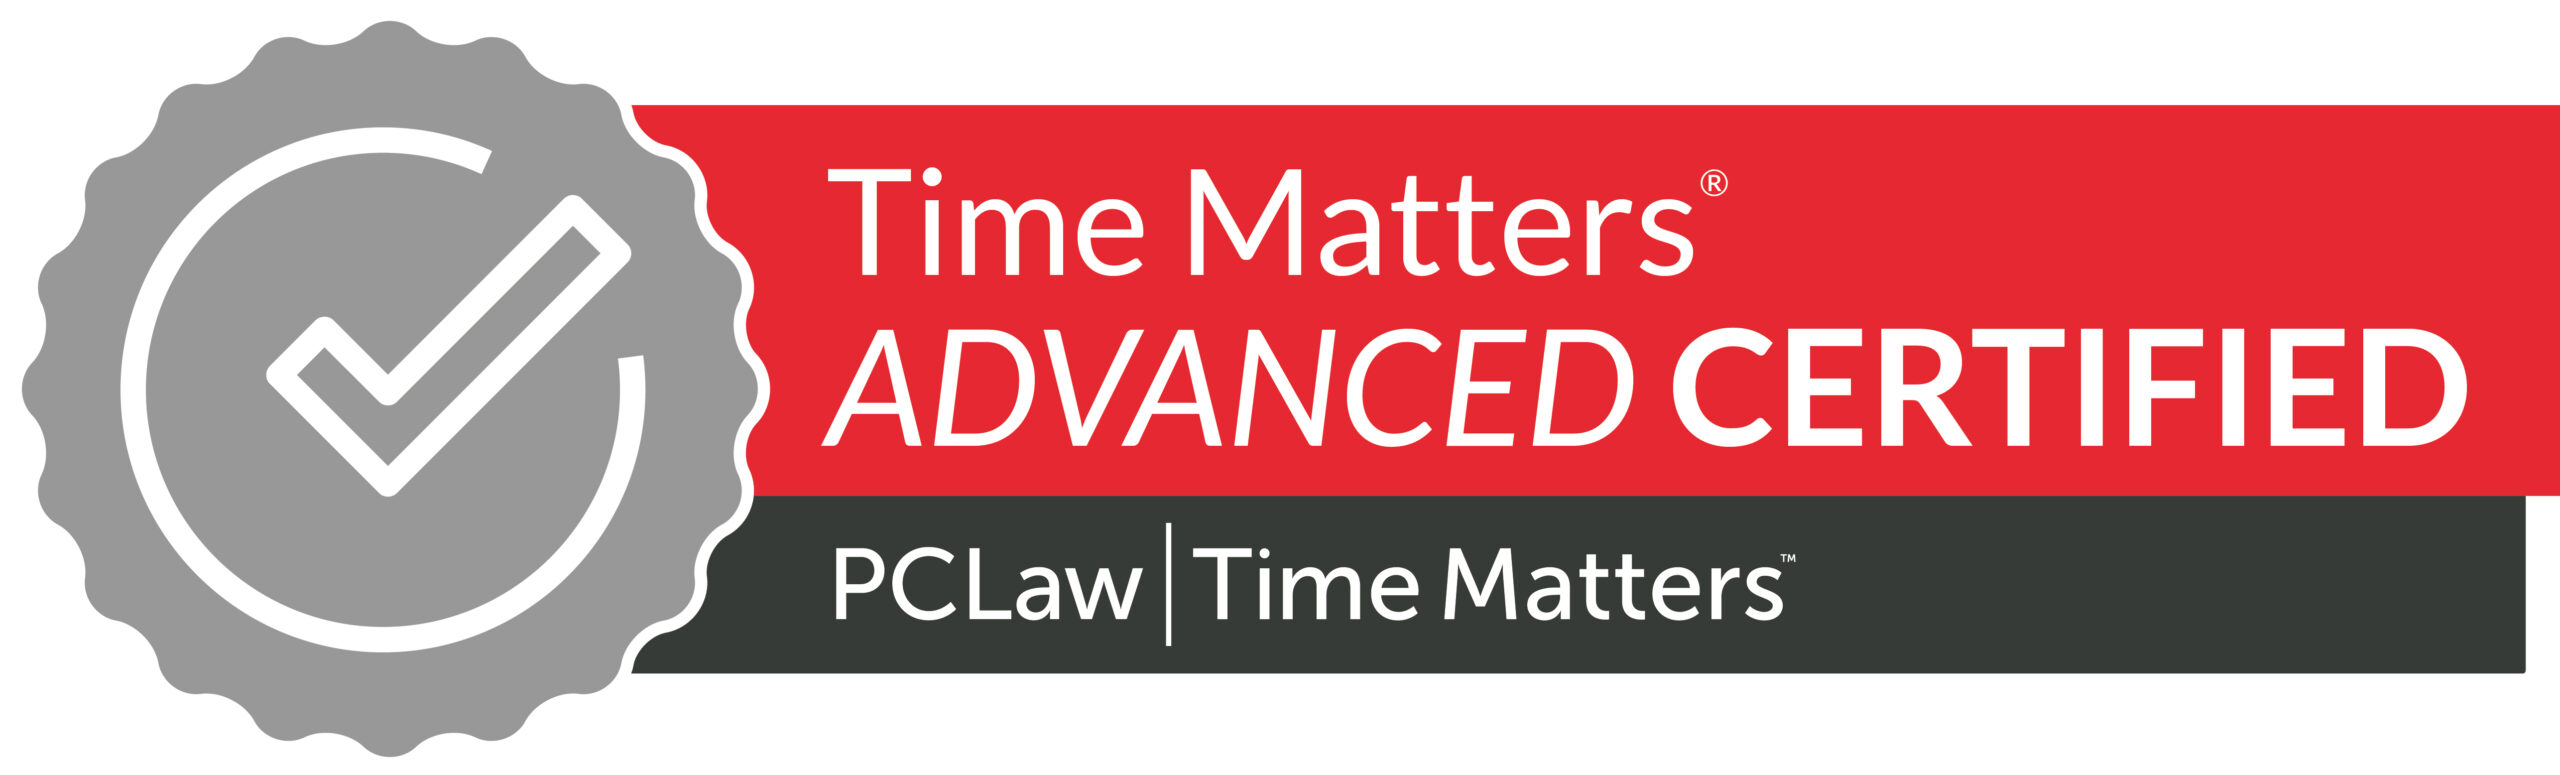 Time Matters Advanced Certified Consultant